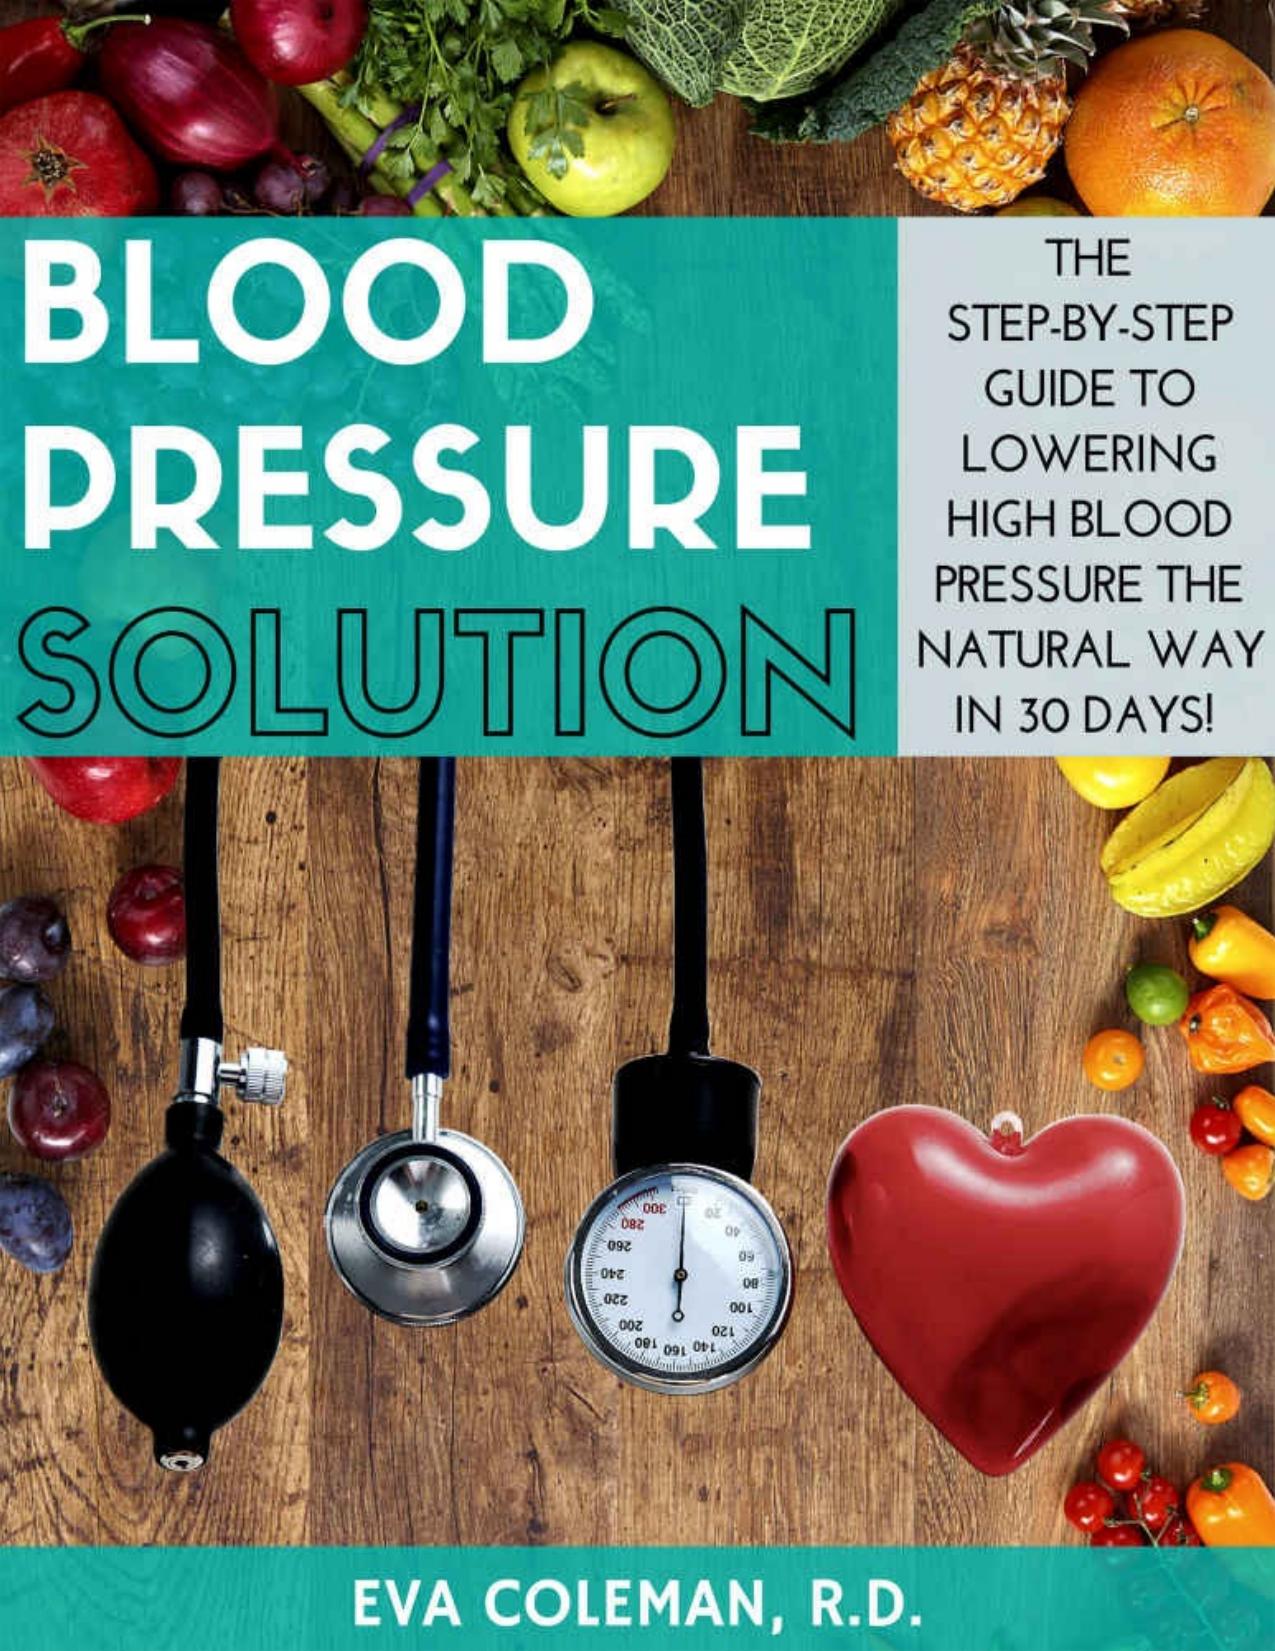 Blood Pressure: Blood Pressure Solution: The Step-By-Step Guide to Lowering High Blood Pressure the Natural Way in 30 Days! Natural Remedies to Reduce Hypertension Without Medication - PDFDrive.com